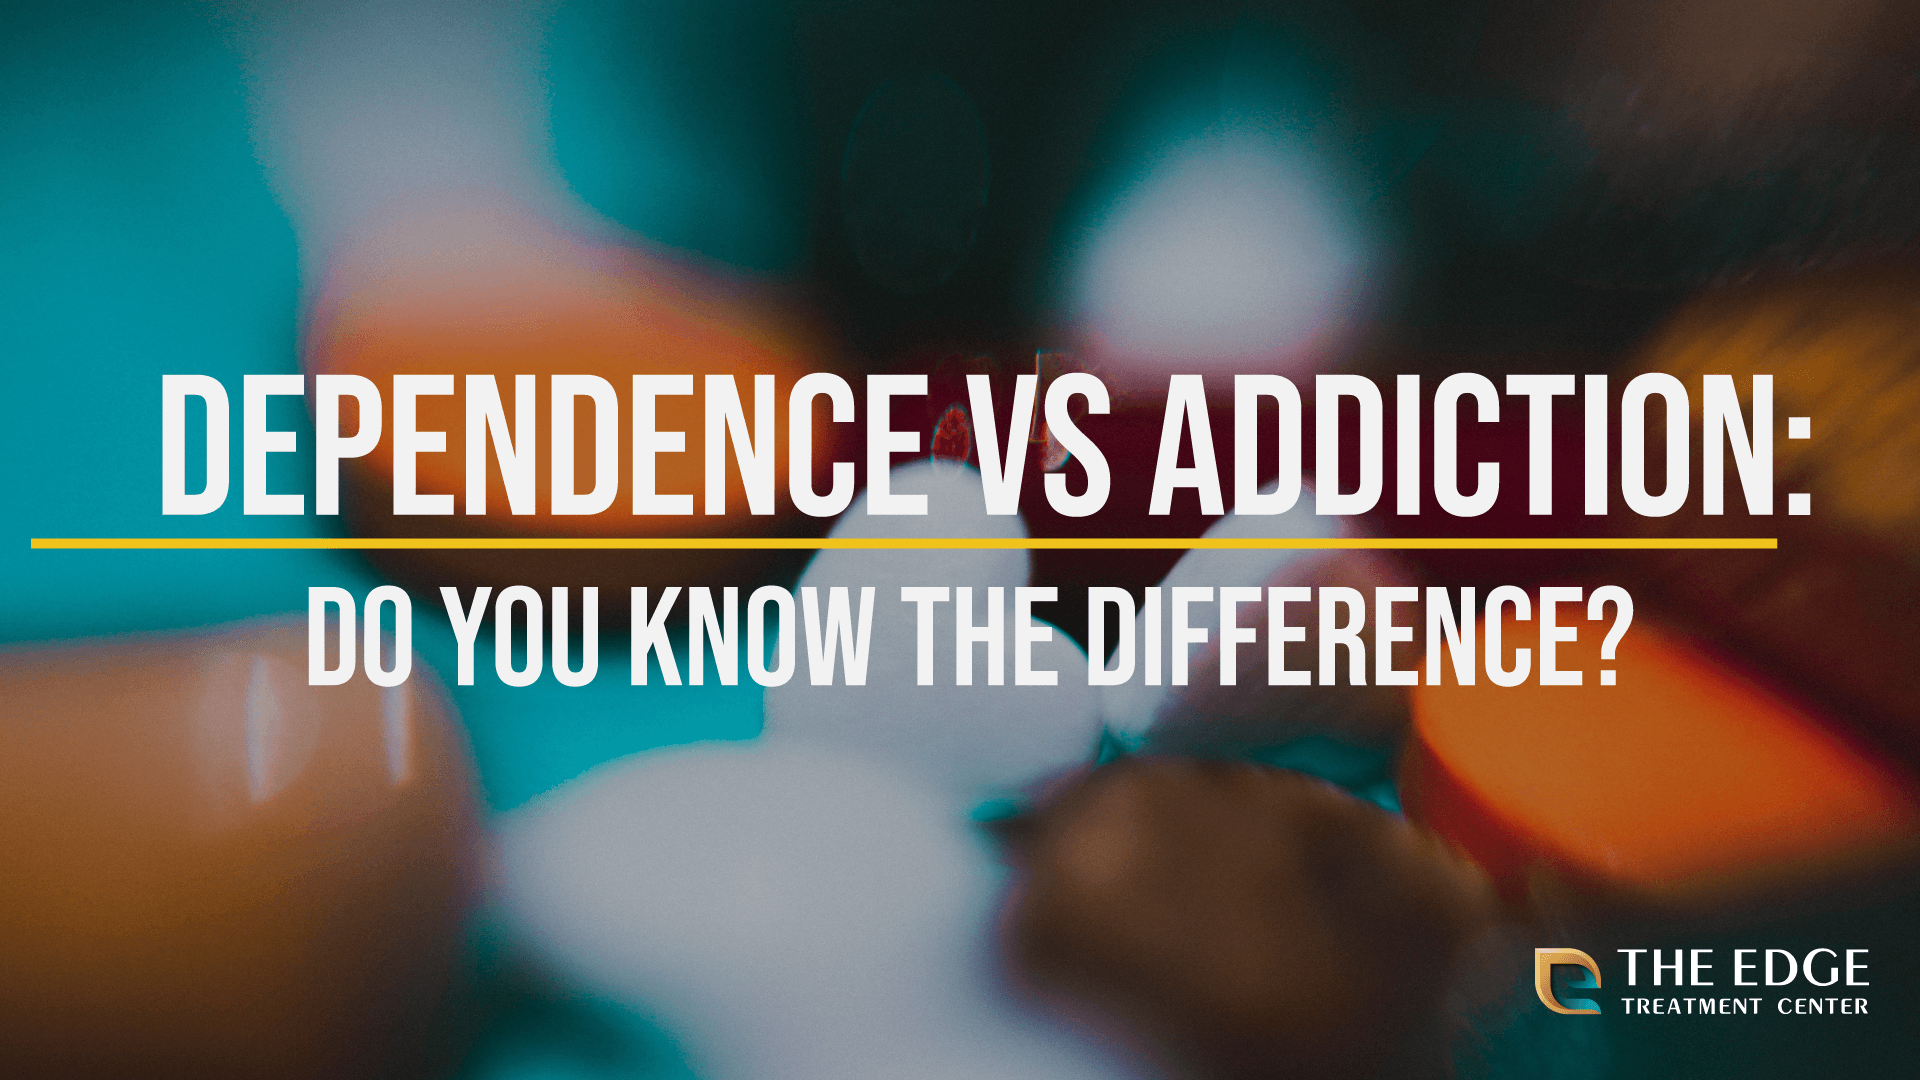 Dependence vs Addiction: Do You Know The Difference?